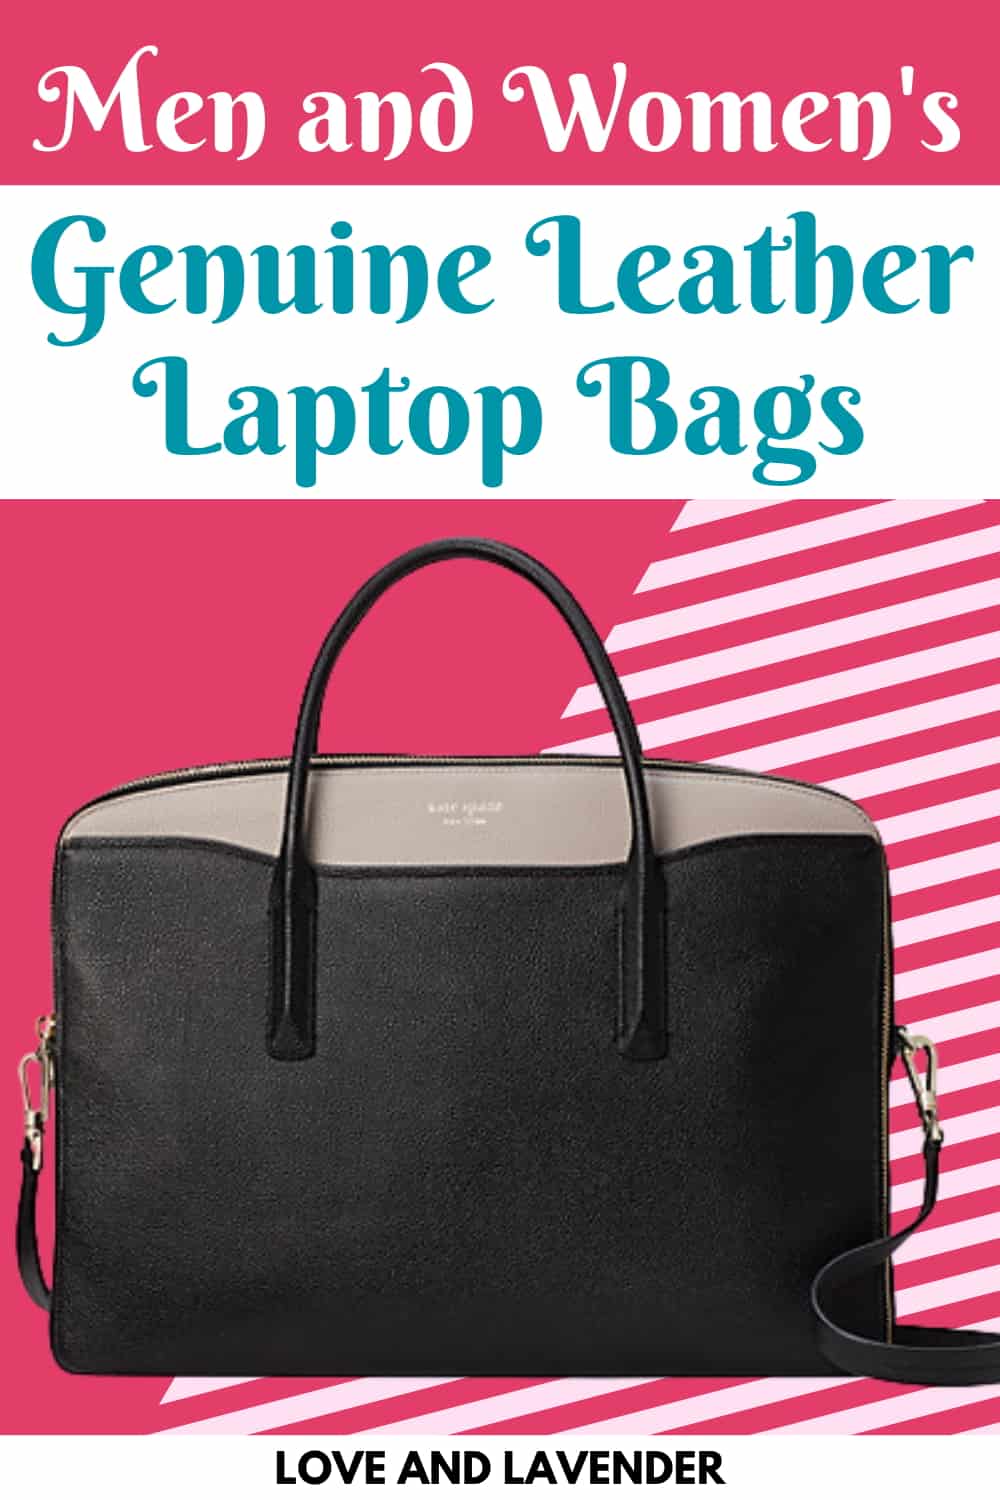 pinterest pin - leather laptop bags